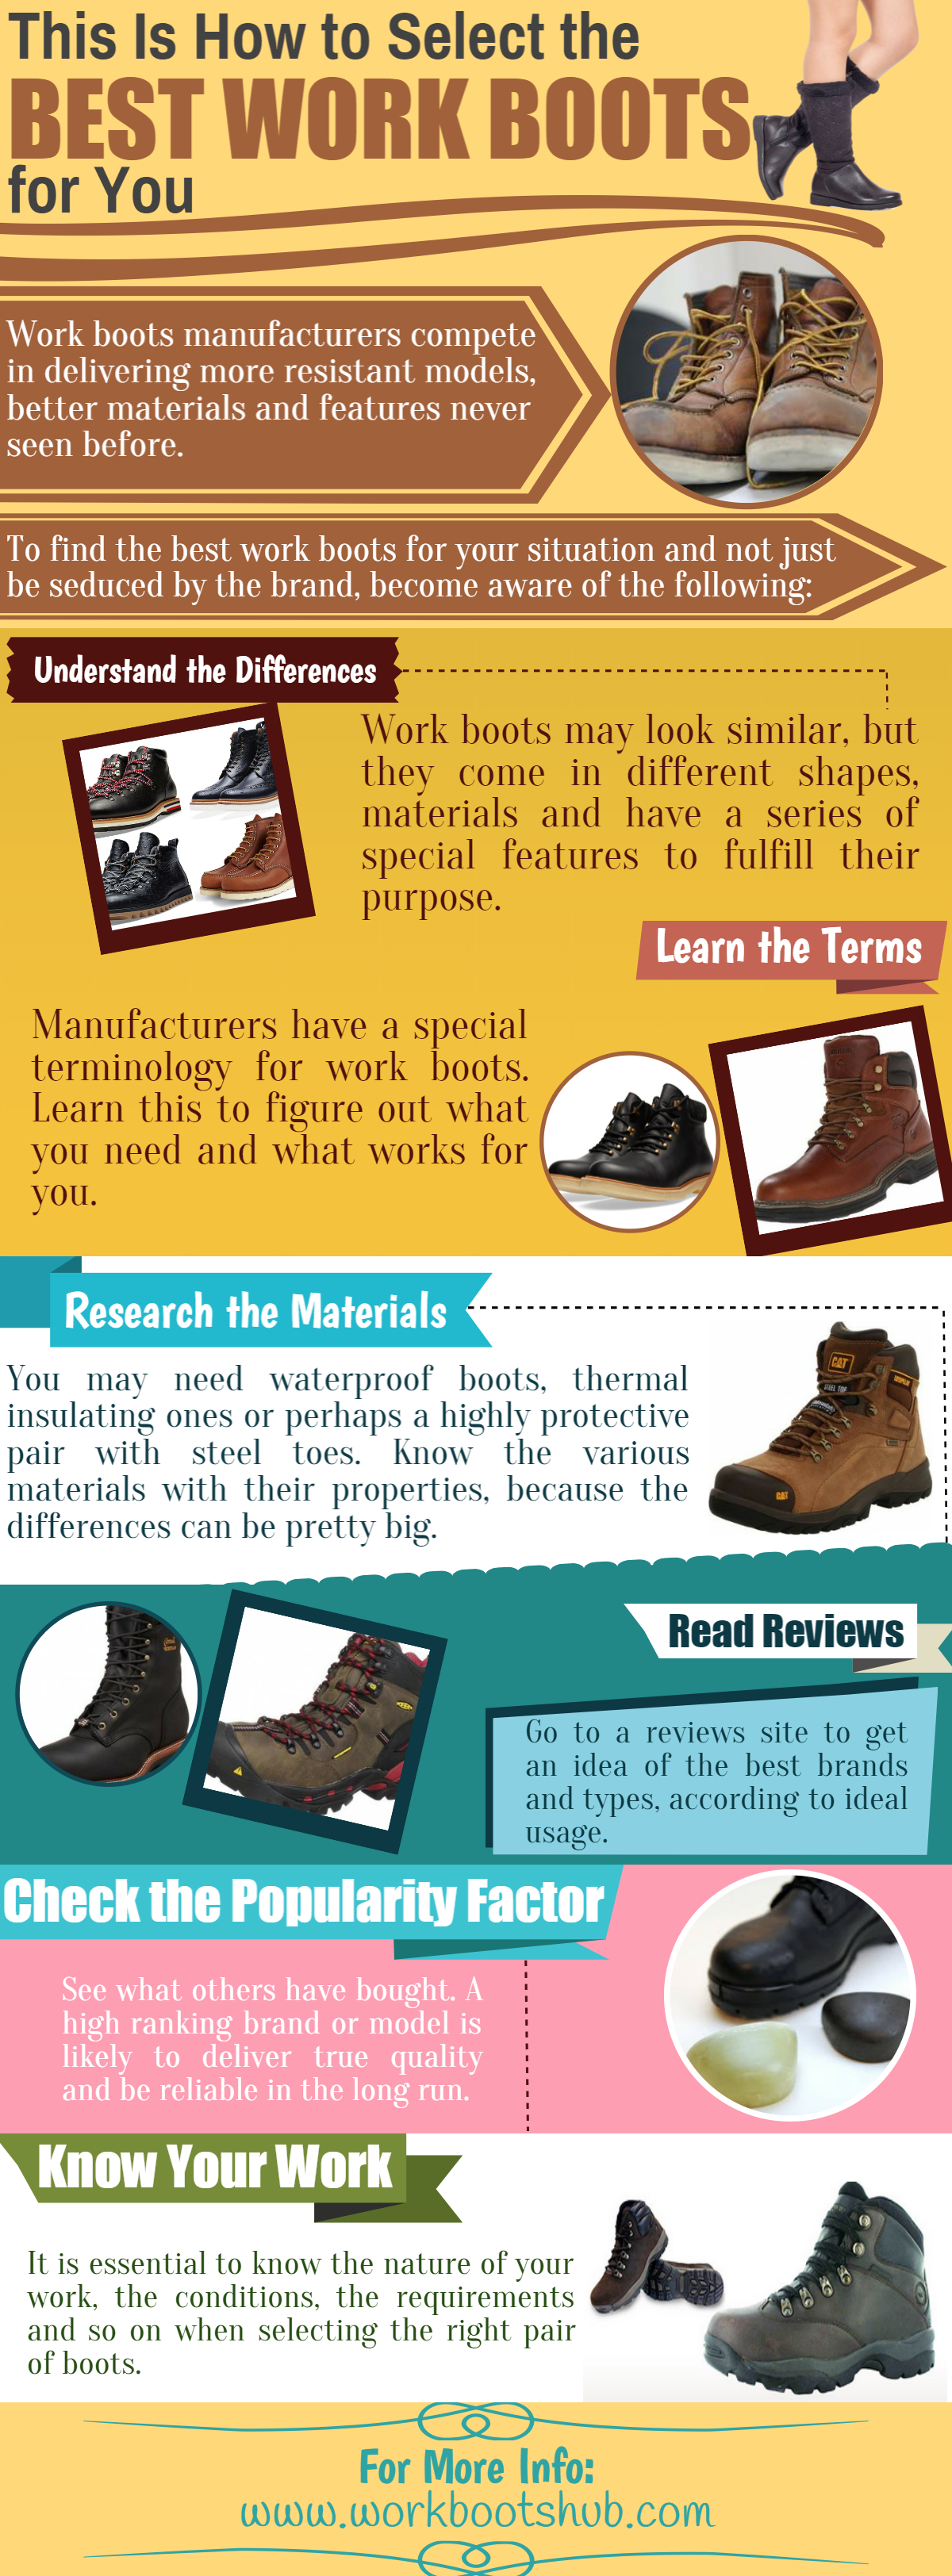 This Is How to Select the Best Work Boots for You | Visual.ly